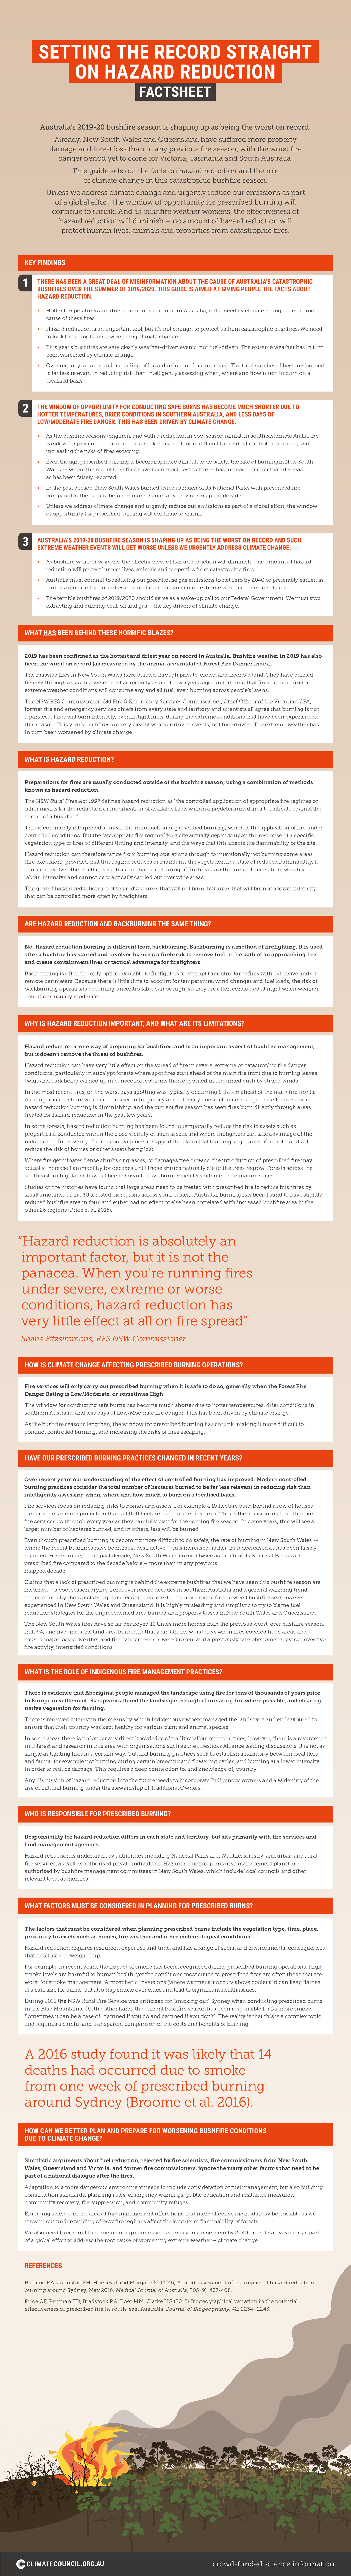 Image of the Hazard Reduction and bushfires fact sheet.